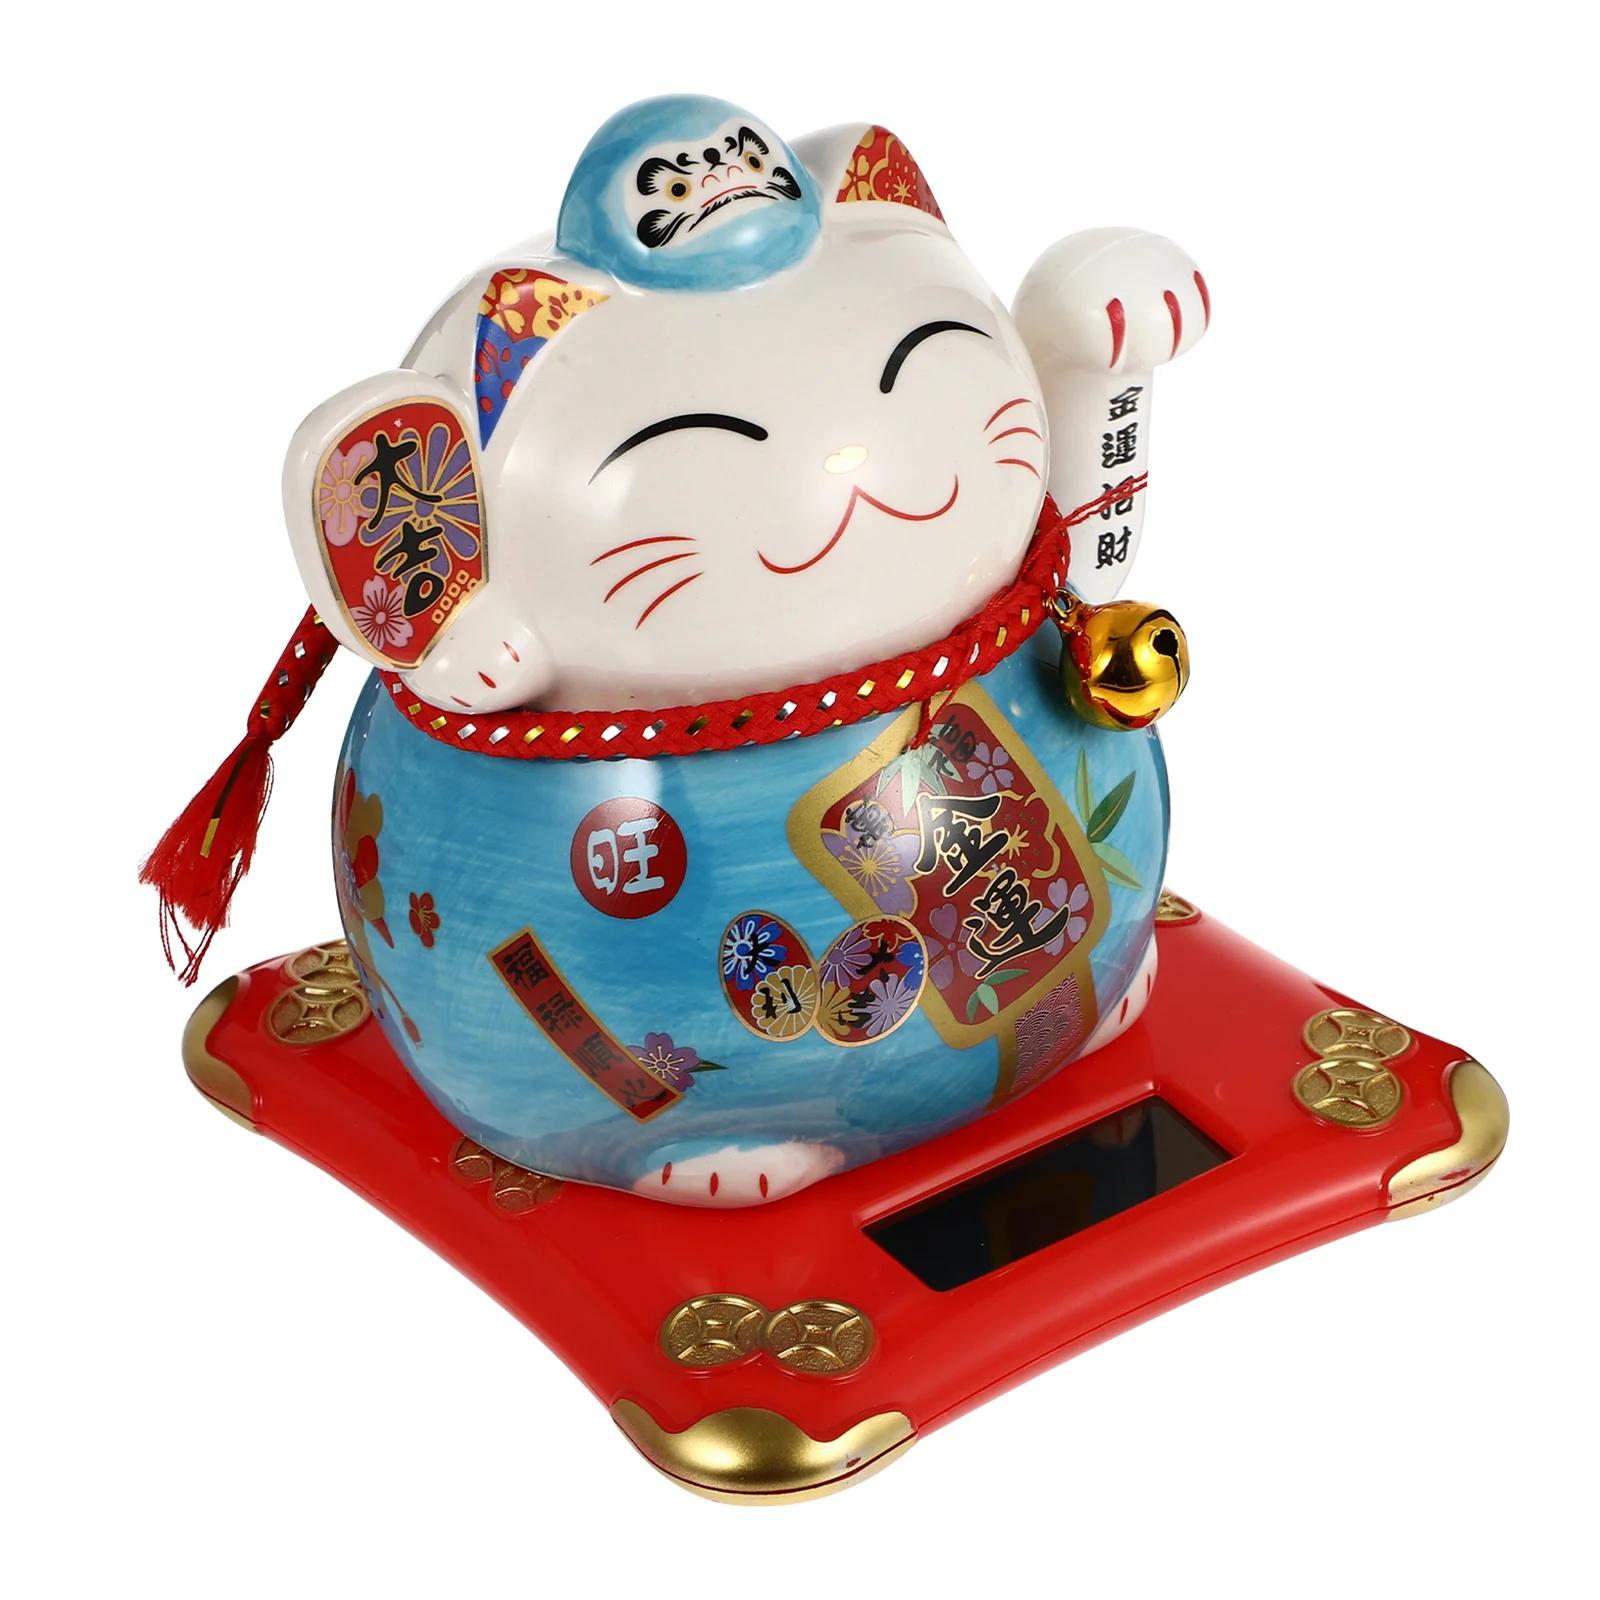 

Cat Lucky Japanese Waving Fortune Chinese Good Statue Ornament Beckoning Solar Figurine Luck Car Money Tabletop Shui Decor Feng